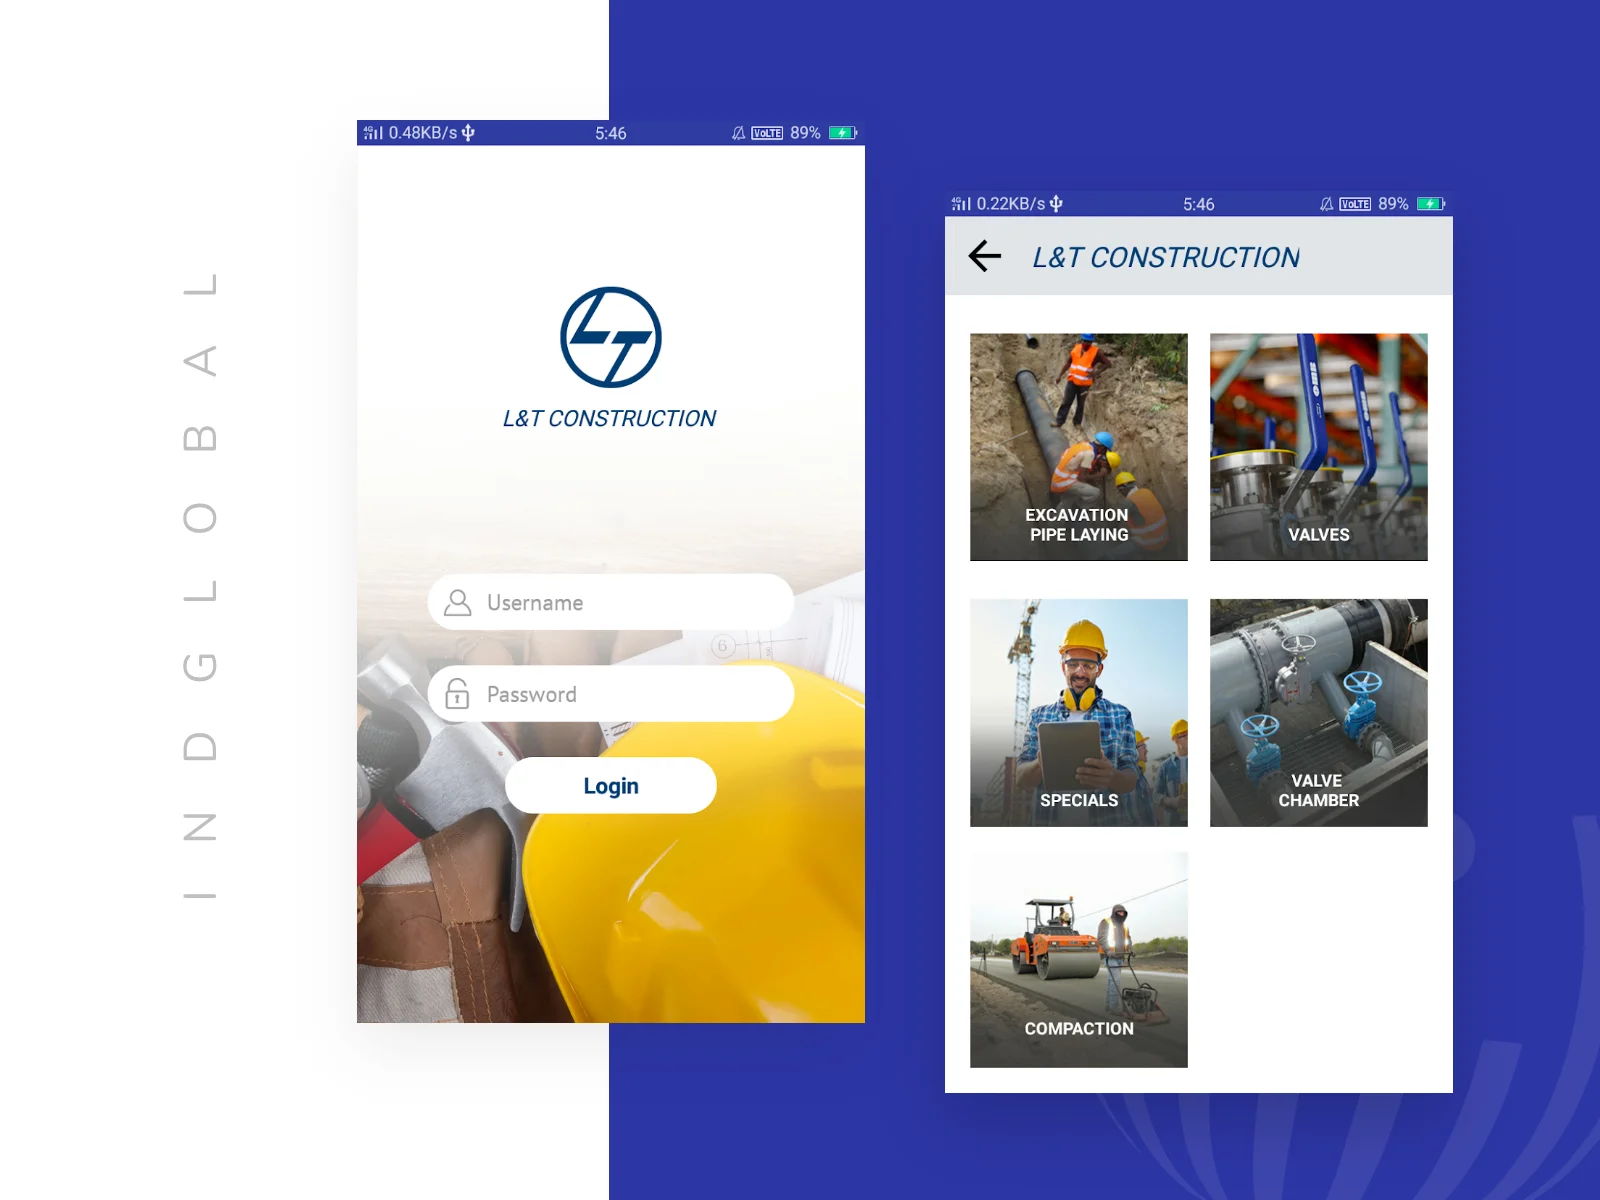 newly designed L&T Water Supply website by indglobal